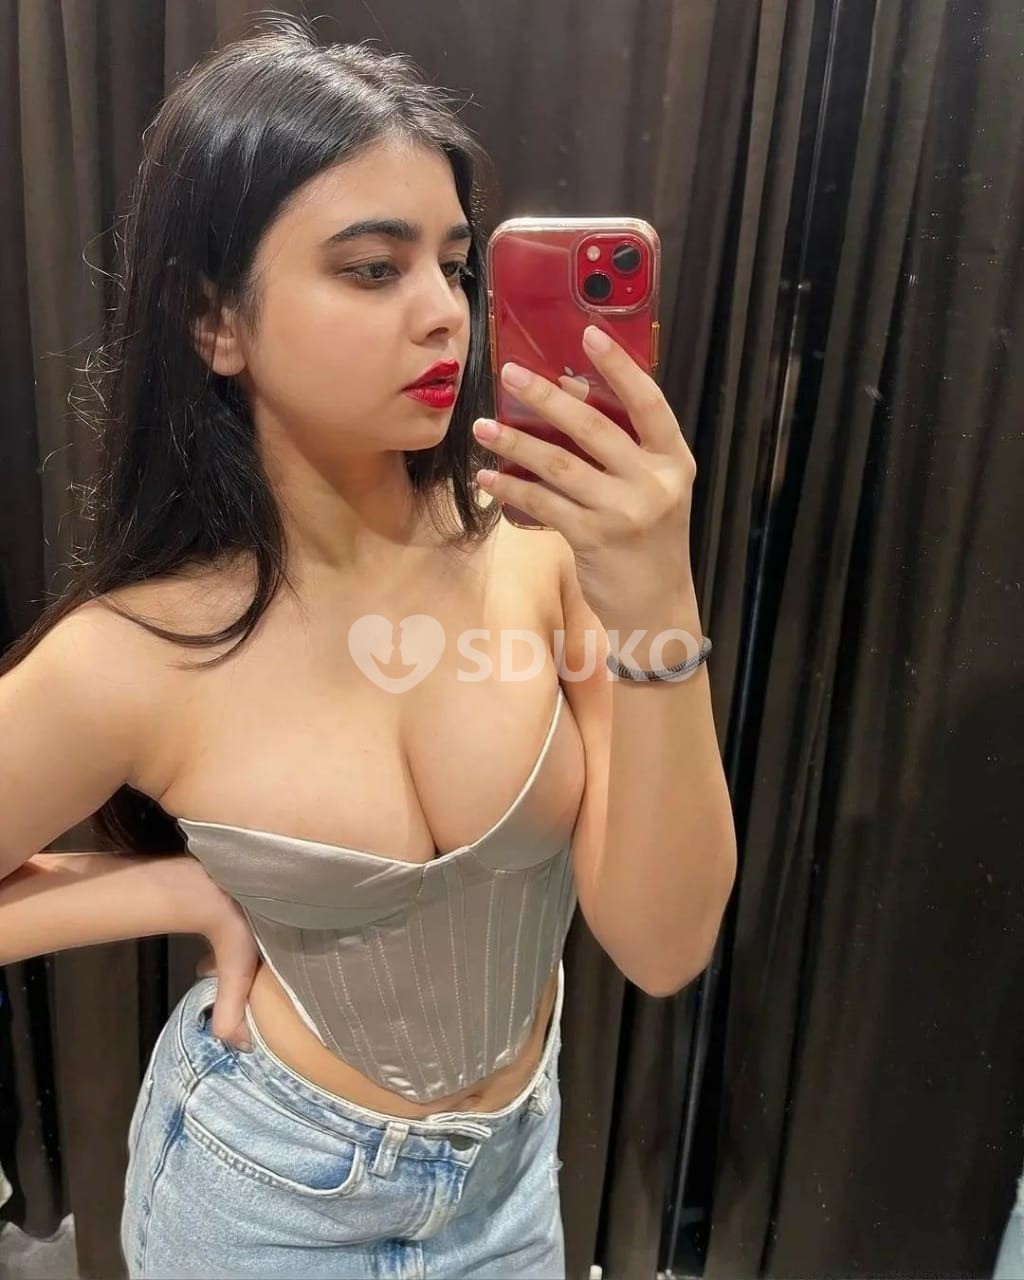 VIMAN NAGAR VIP TODAY LOW 🌛/PRICE ESCORT 🥰SERVICE 100% SAFE AND SECURE ANYTIME CALL ME 24 X 7 SERVICE AVAILABLE 10